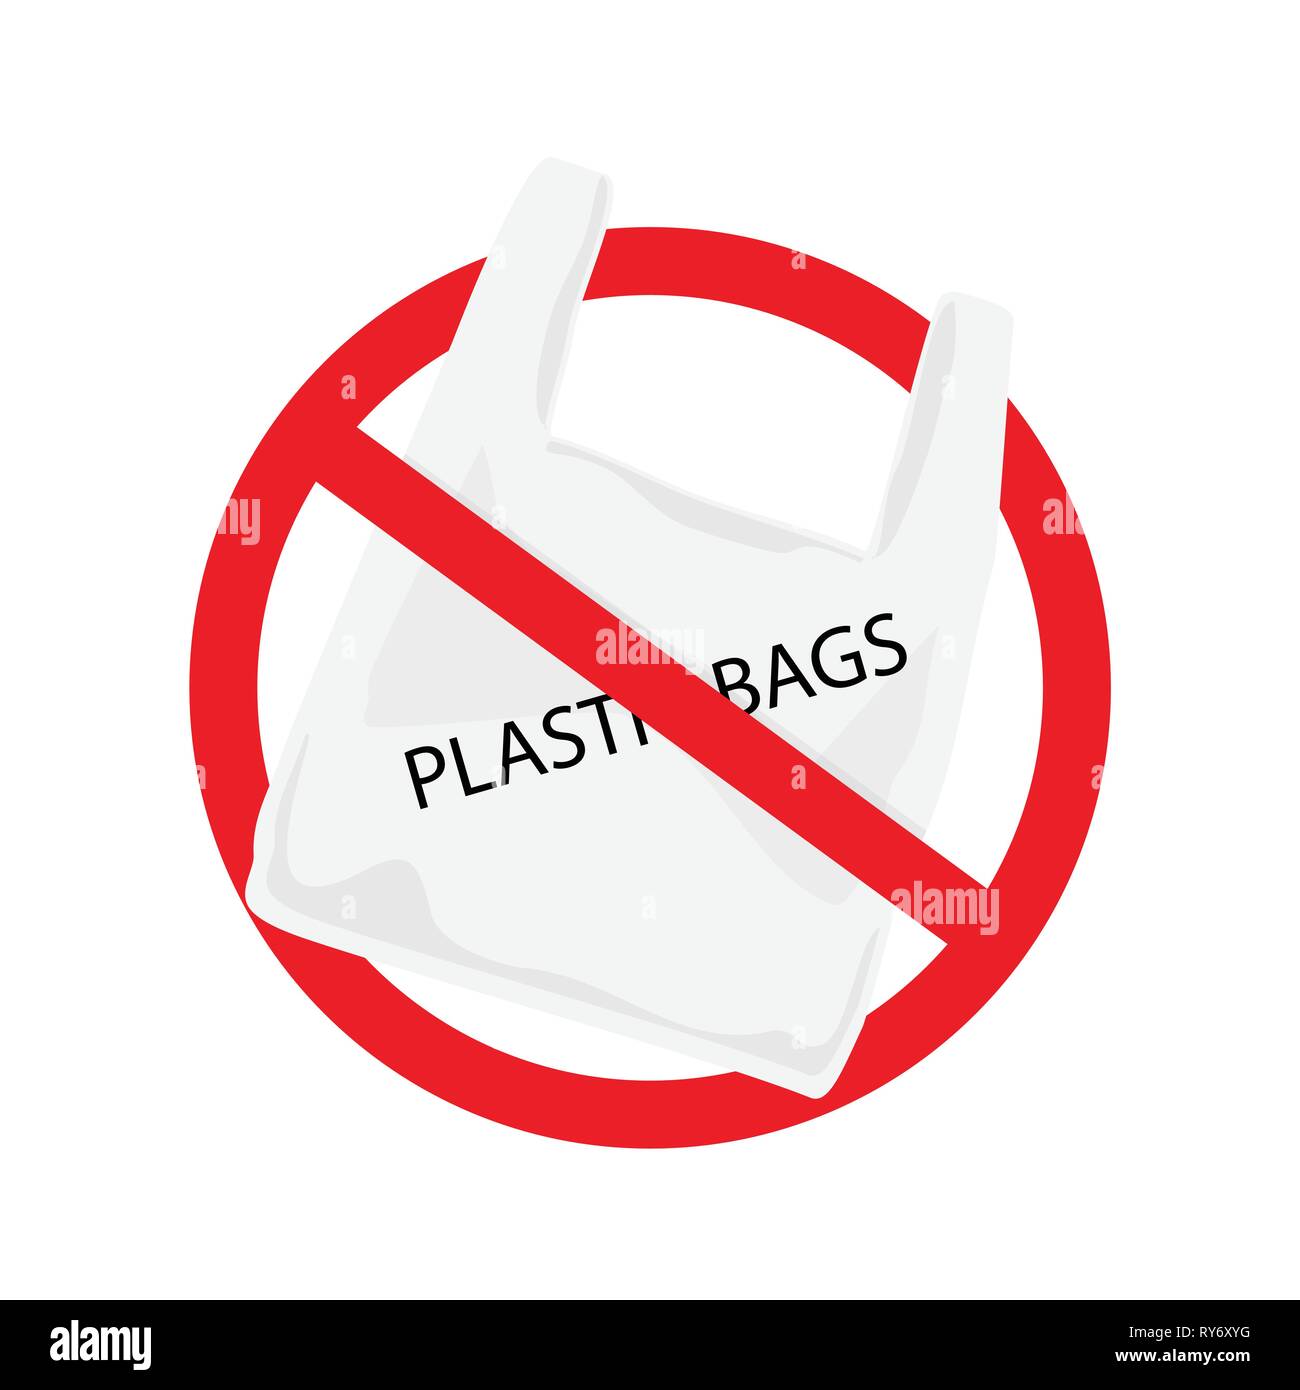 Say No To Plastic Bags Stock Photos & Say No To Plastic Bags Stock ...